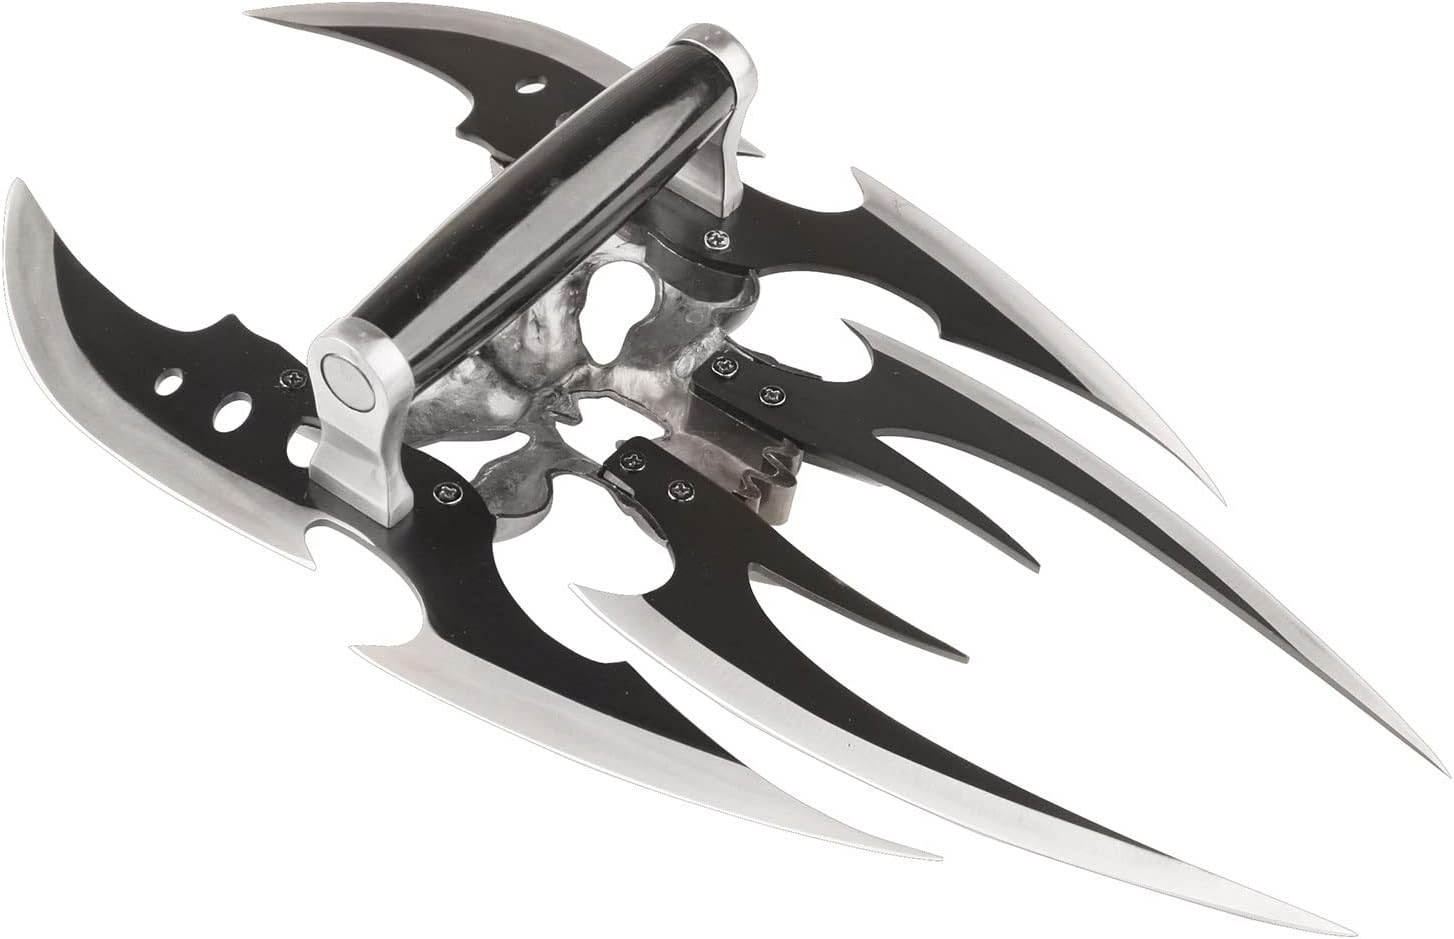 Fantasy Claw Display Knife – Black and Satin Finish Stainless Steel Blades